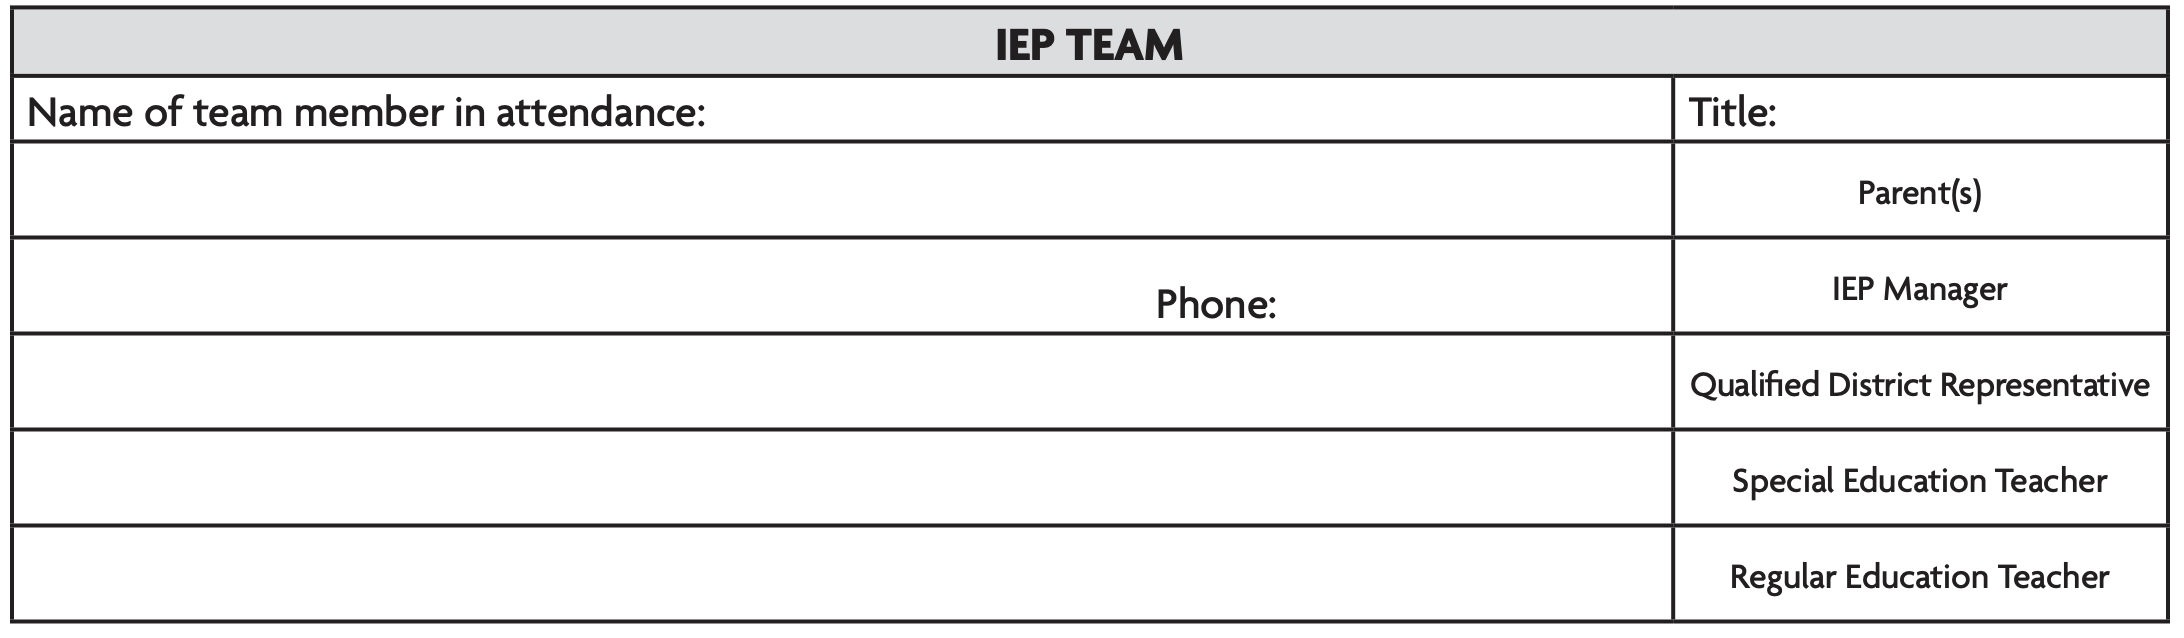 Image is a table made to be filled in with the names of IEP team members in attendance. Such members are parents, IEP manager, qualified district representative, special education teacher, and regular education teacher.